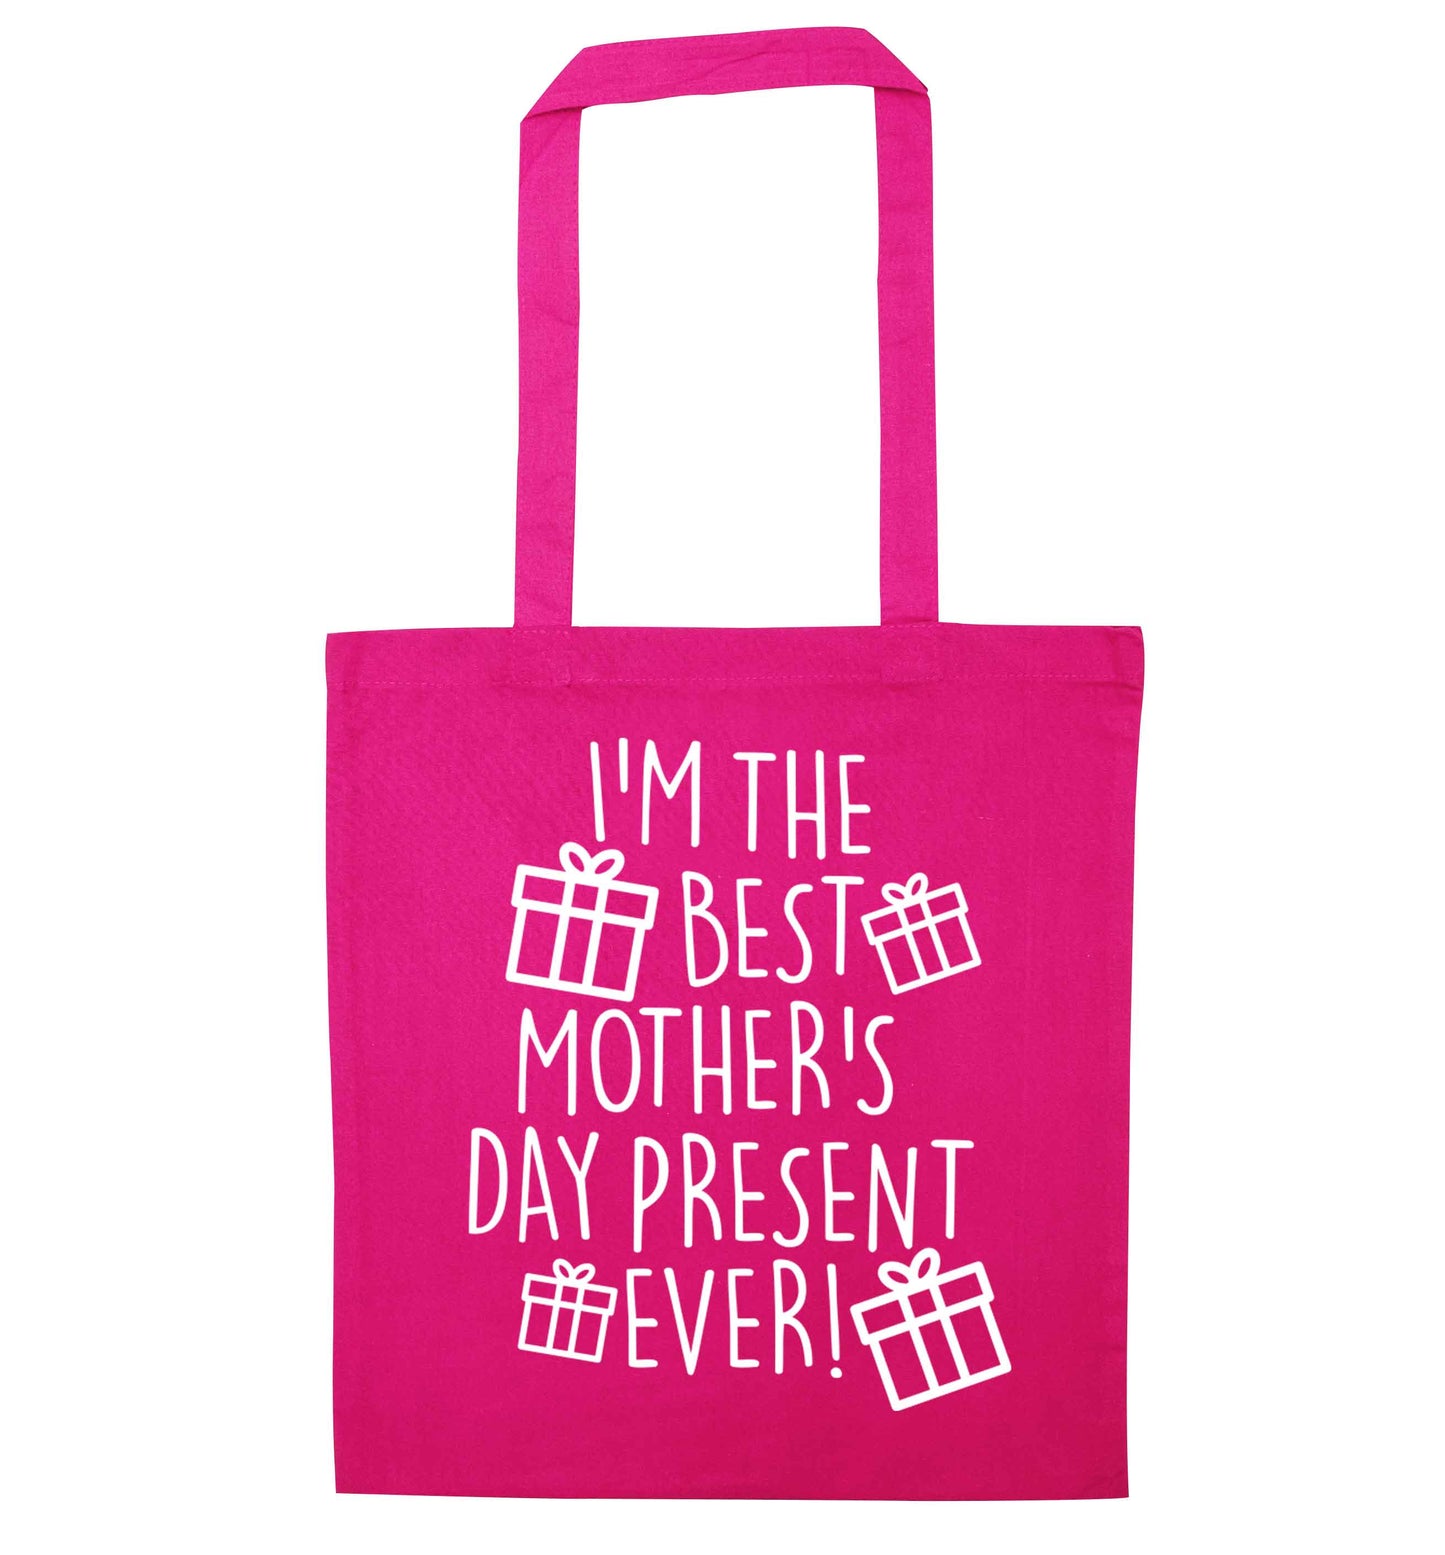 I'm the best mother's day present ever! pink tote bag